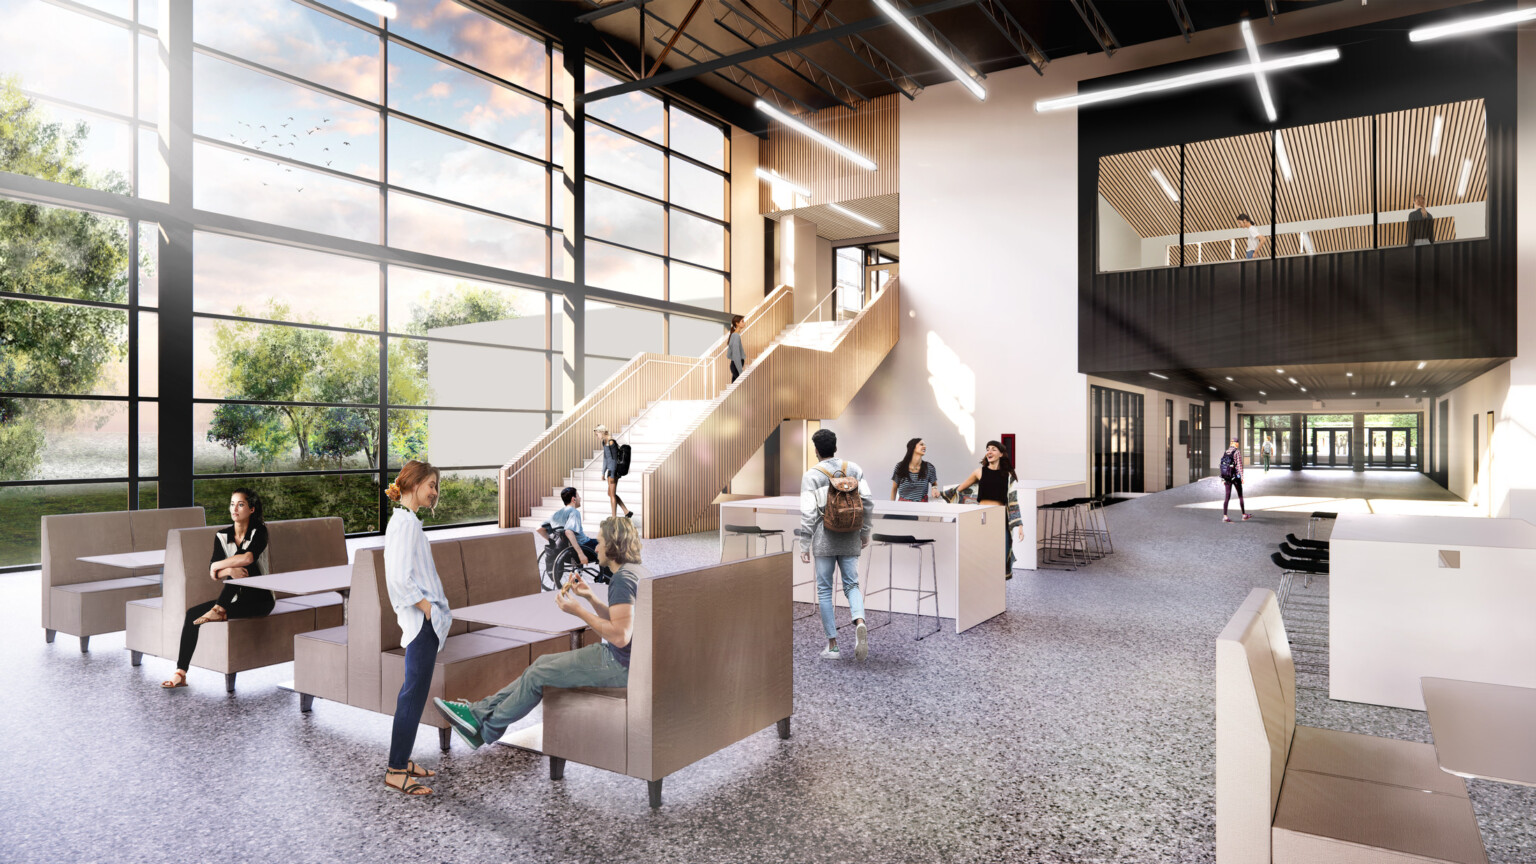 floor-to-ceiling windows provide natural light that helps provide focus for students and faculty, triple-height ceiling gives a sense of expansiveness, polished concrete flooring, light wood staircase, comfortable seating in muted creams, greys, and beiges promote a sense of well-being